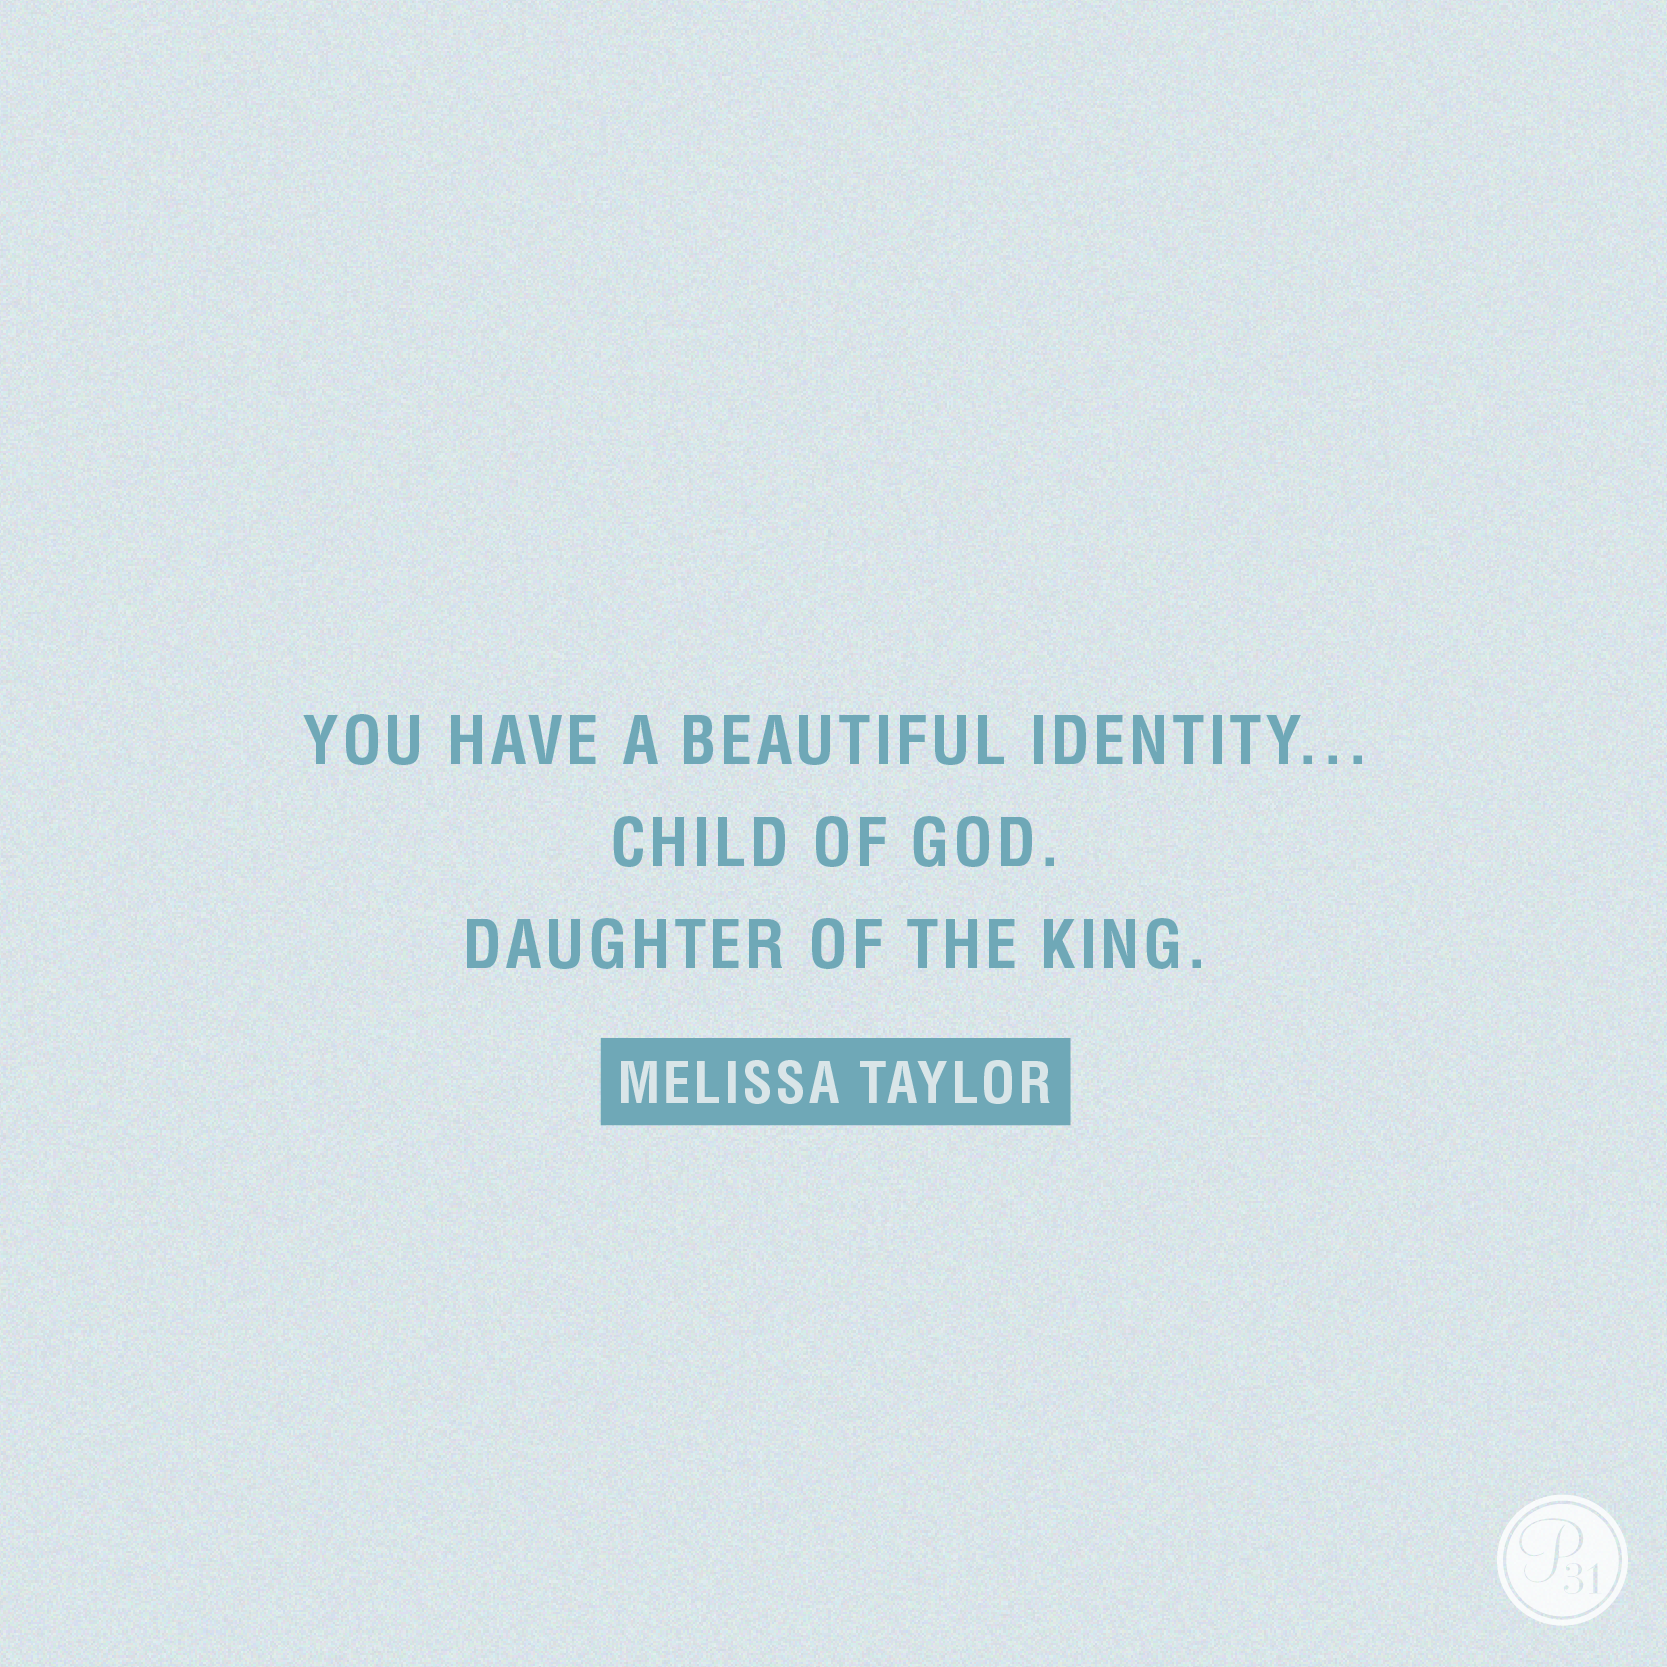 “Stained and Ruined” by Melissa Taylor | Proverbs 31 Online Bible Studies |  #HiddenJoyBook #P31OBS